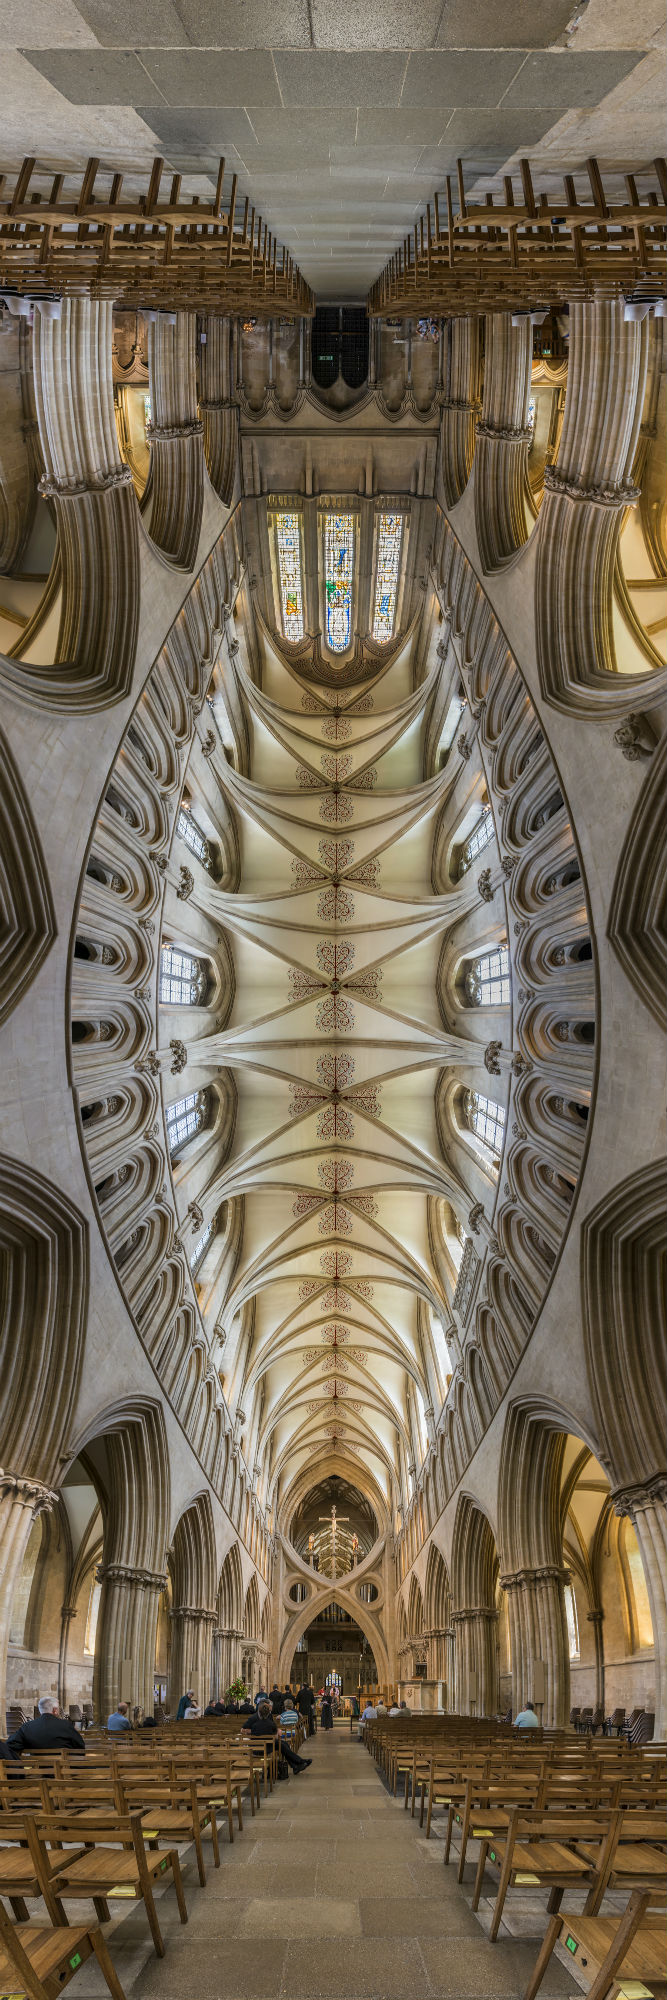 Wells Cathedral - Wells, England / Richard Silver